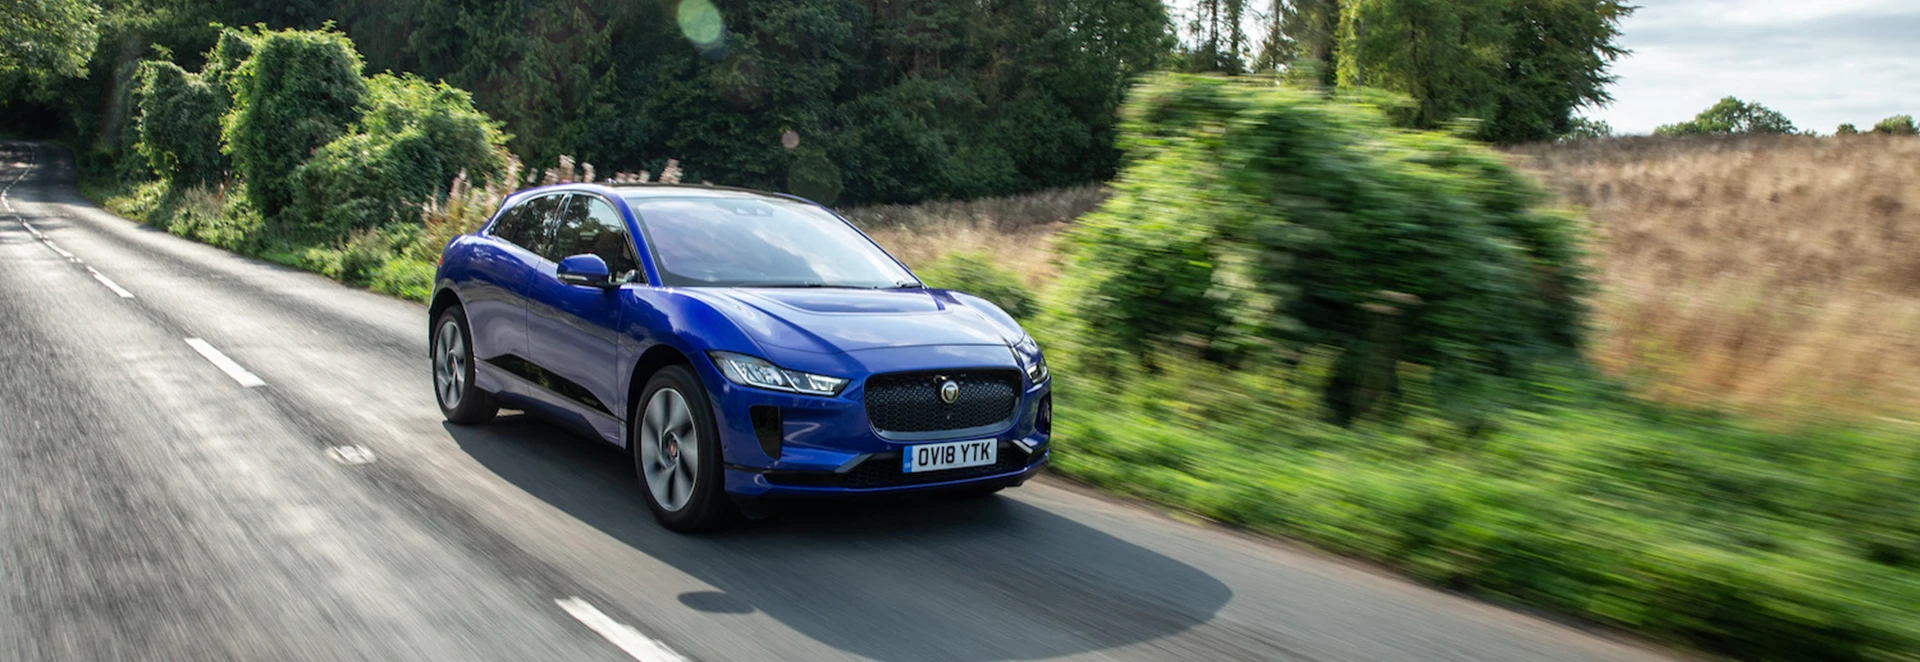 Buyer’s Guide to the Jaguar I-Pace